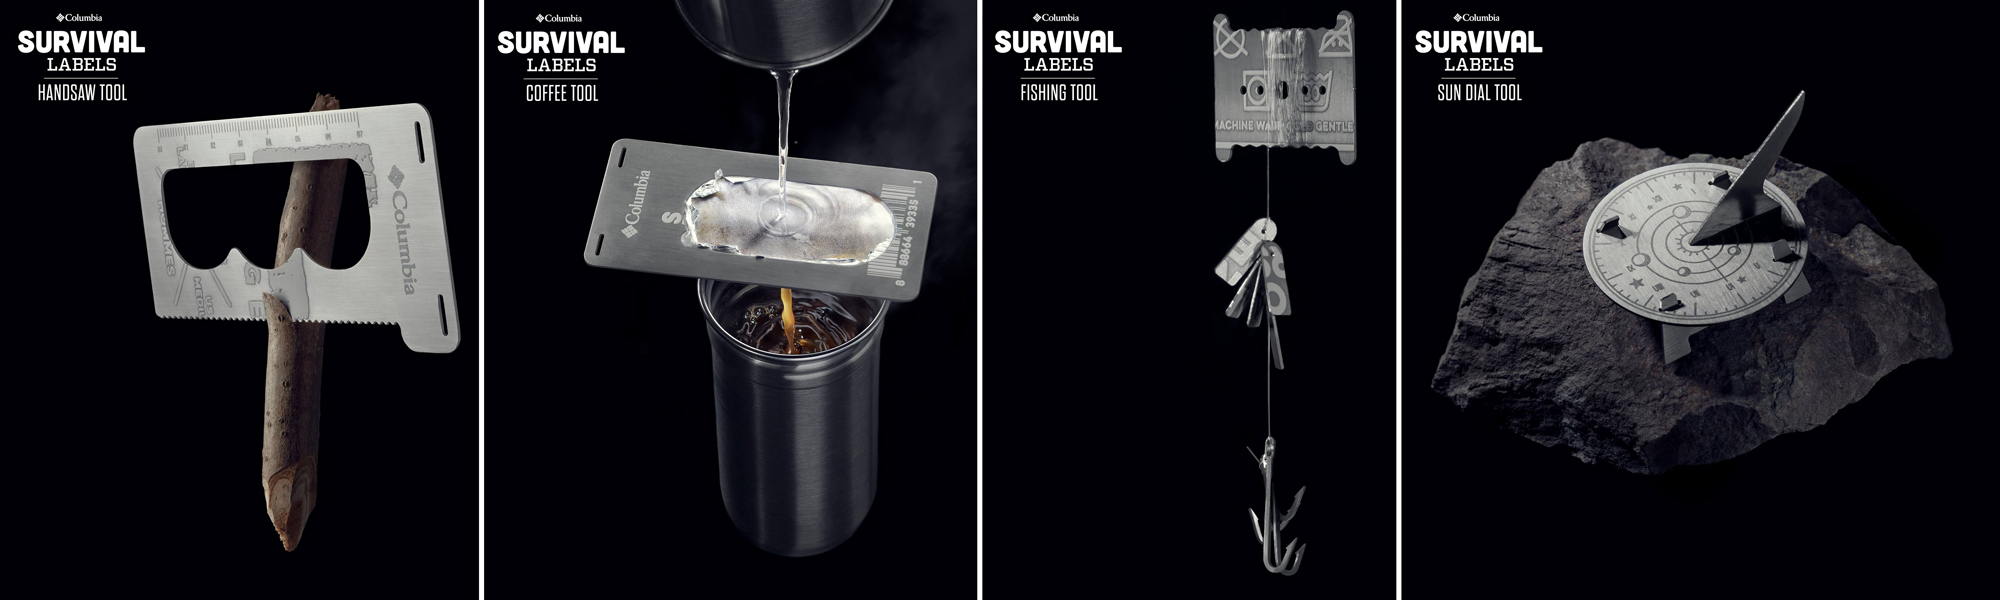 Columbia Turned Its Clothing Labels Into Stainless Steel Survival Tools